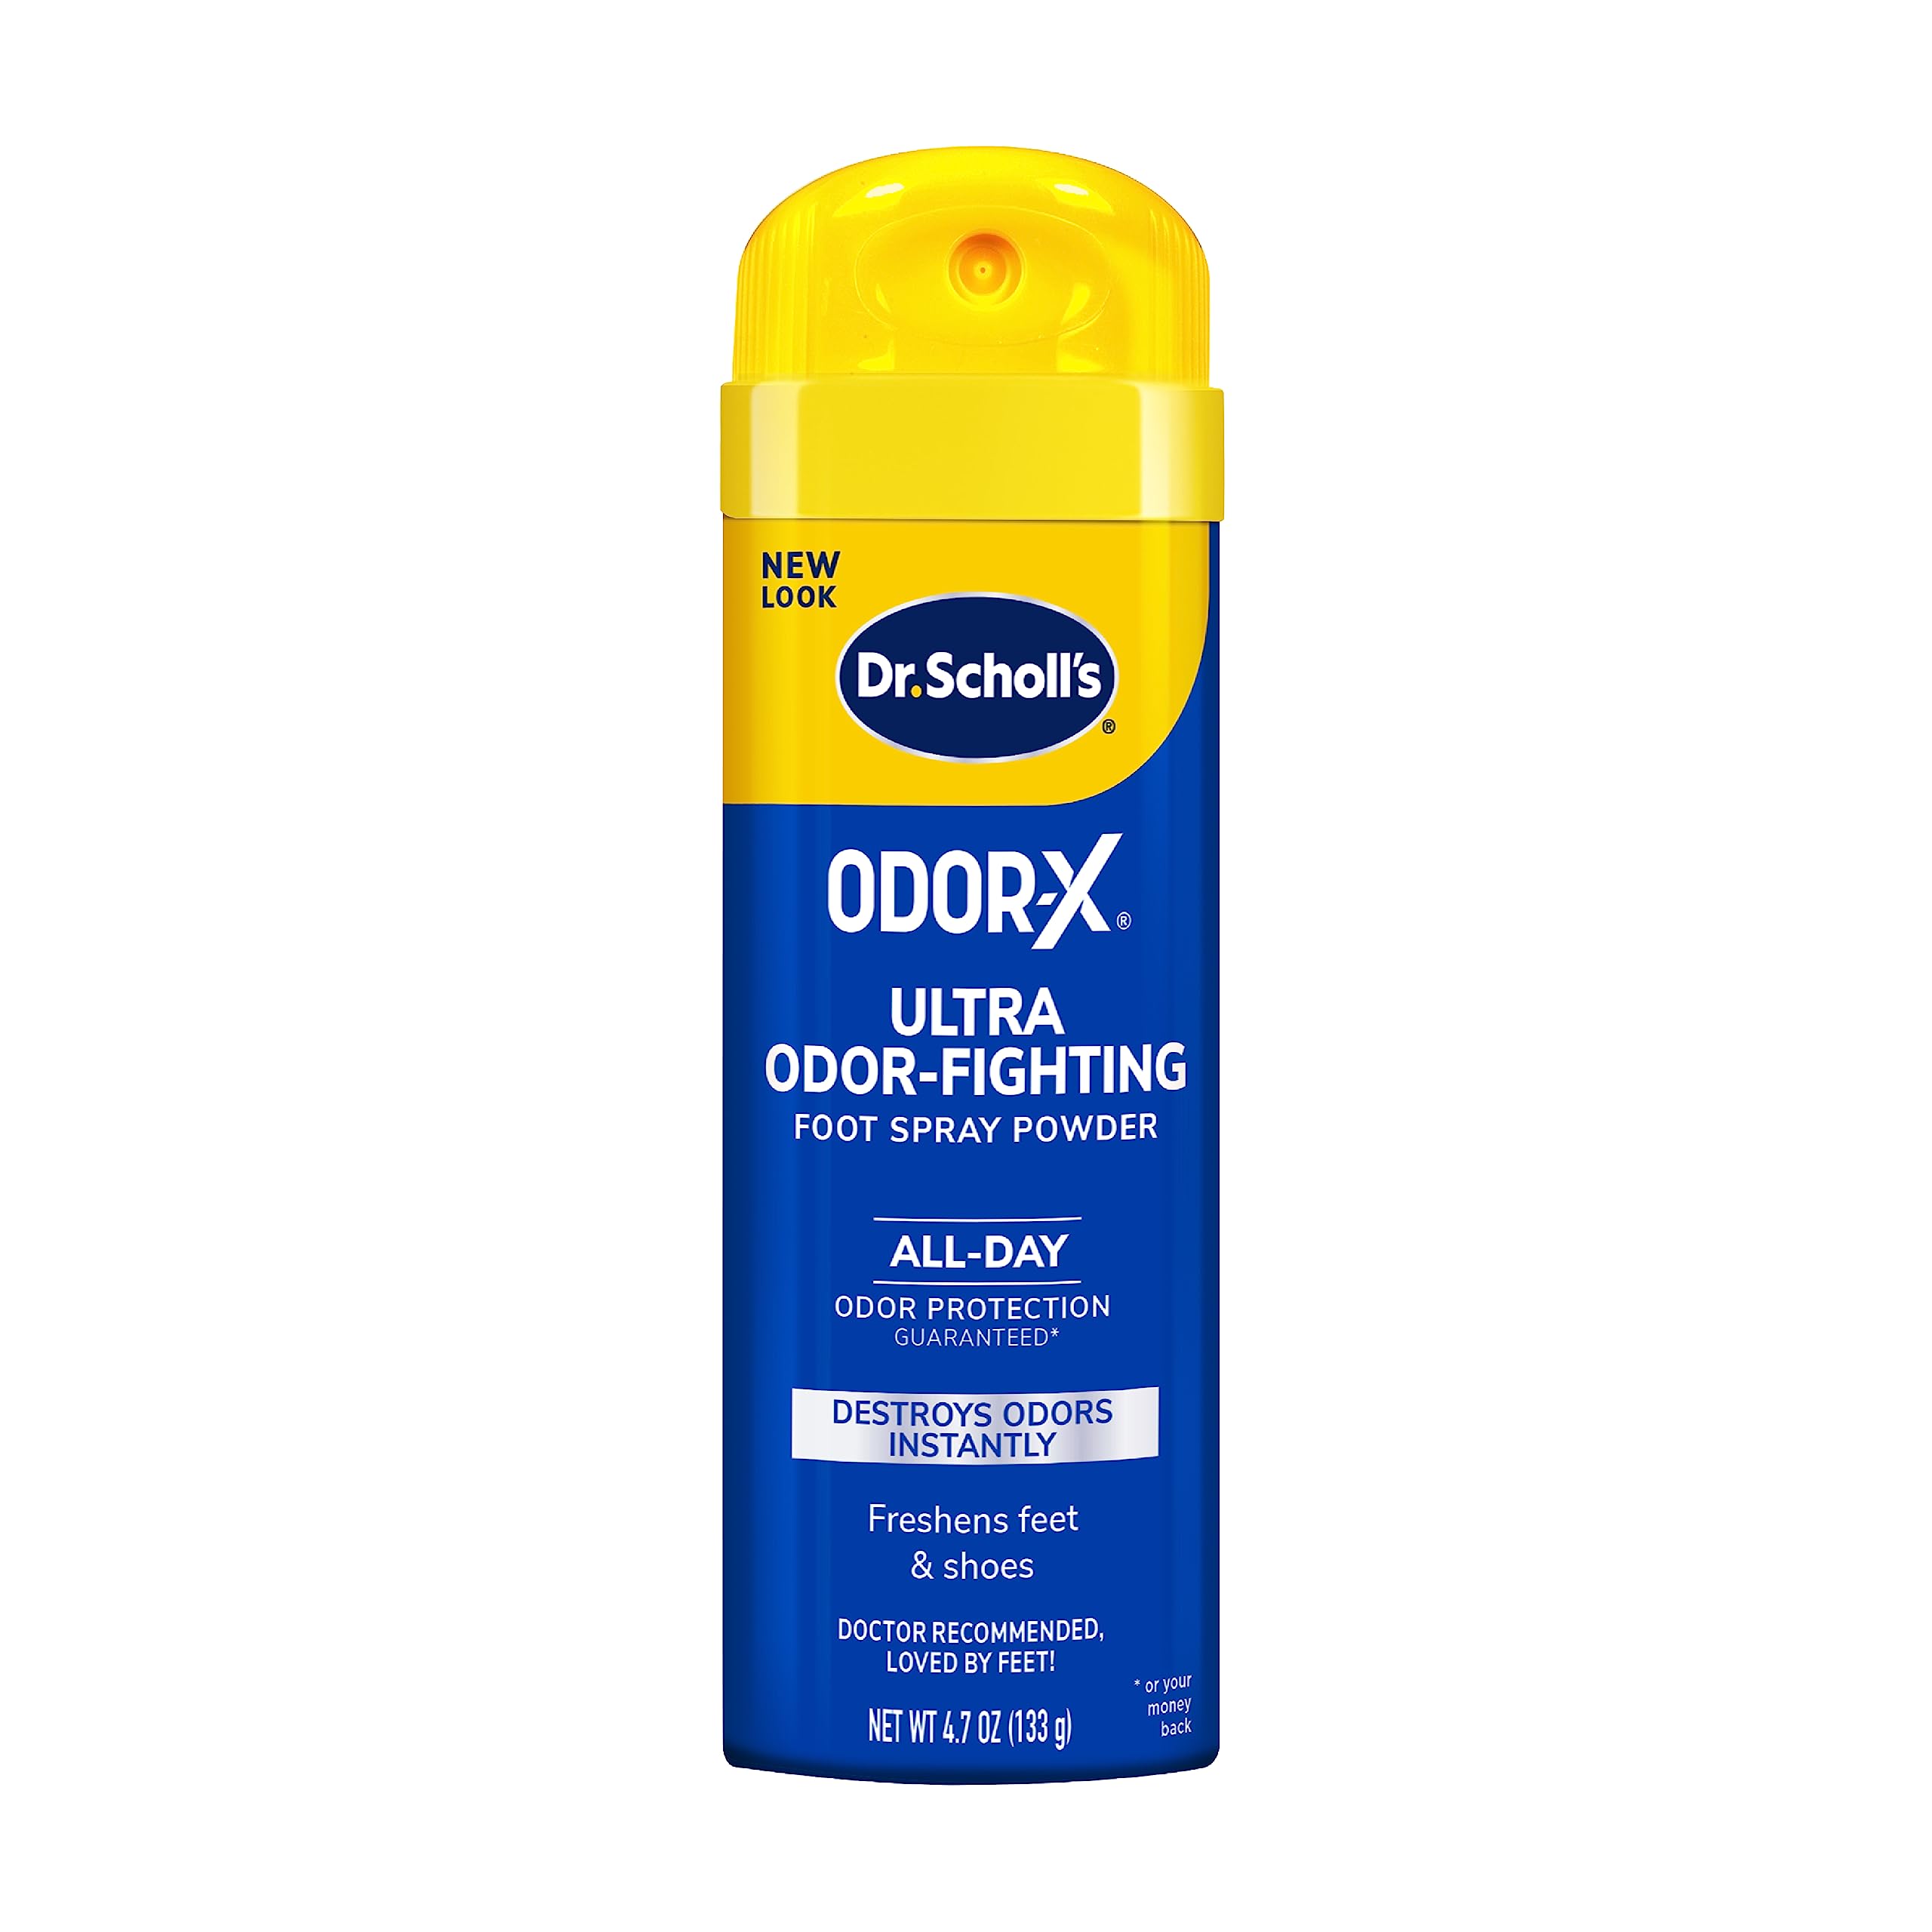 Dr. Scholl’s Odor-X ODOR-FIGHTING Spray-Powder // All-Day Odor Protection and Sweat Absorption - Packaging May Vary 4.7 Ounce (Pack of 1), Now Only $3.23